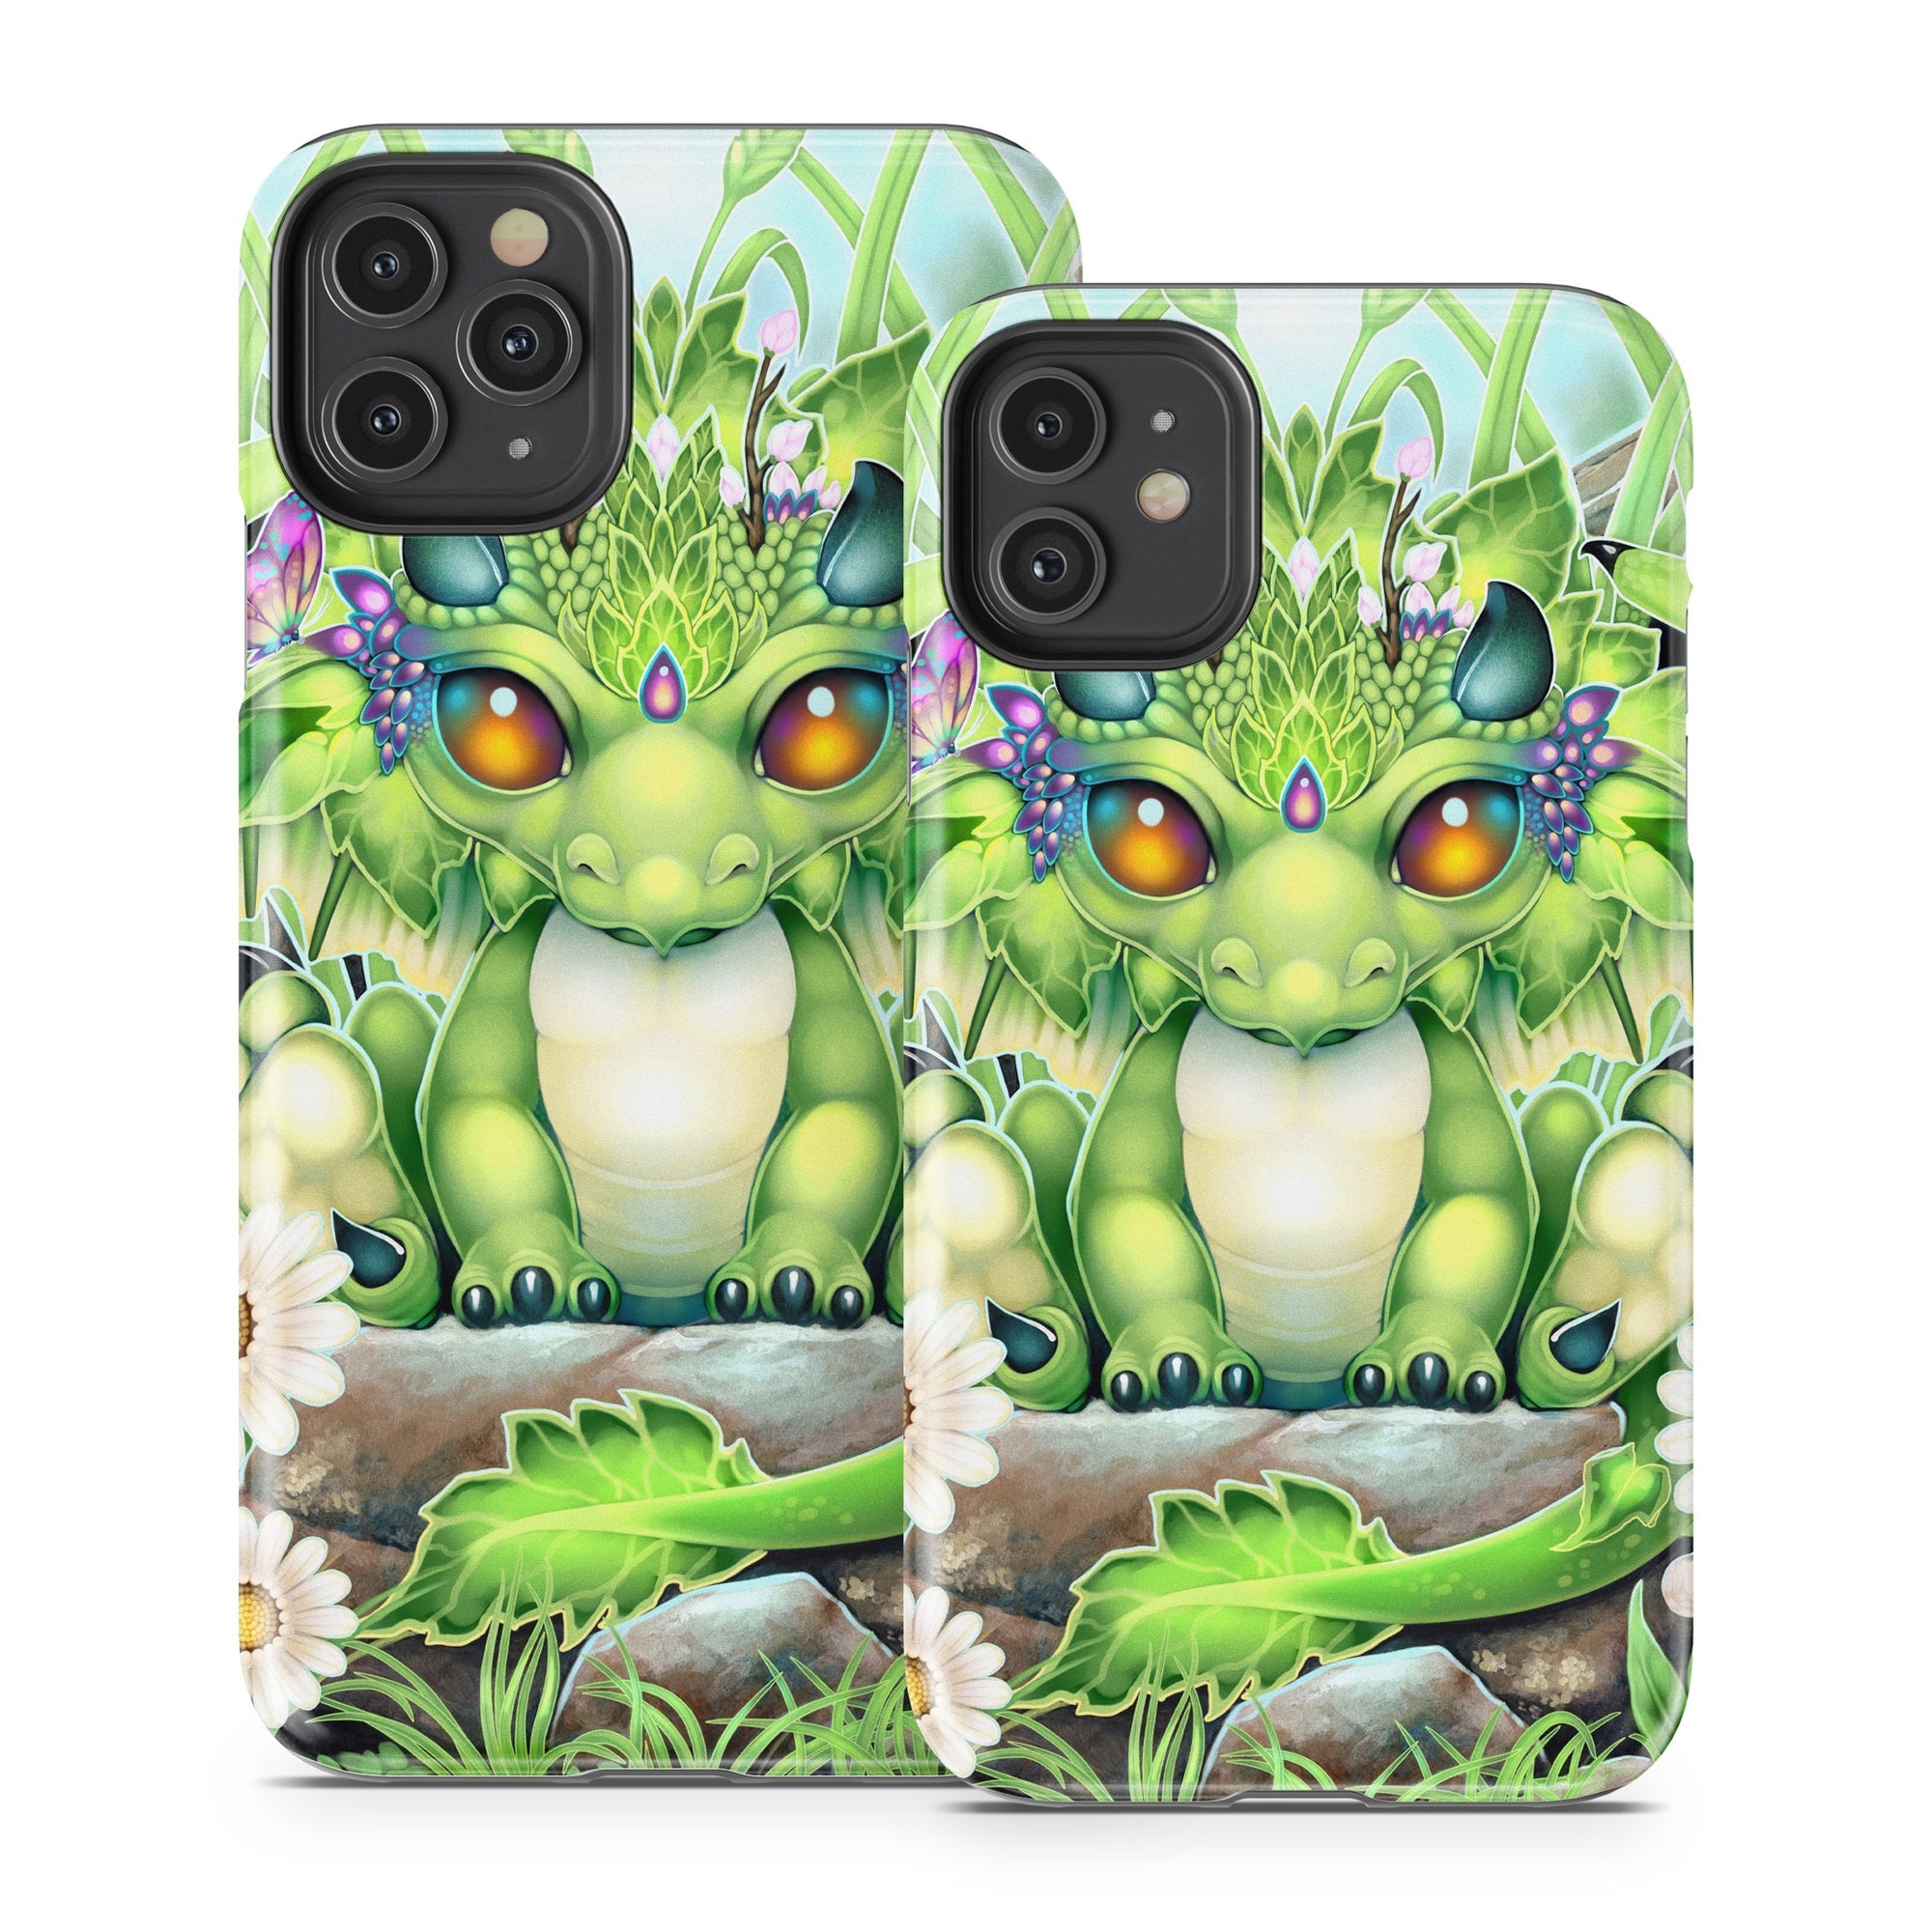 Love Your Inner Child - Apple iPhone 11 Tough Case